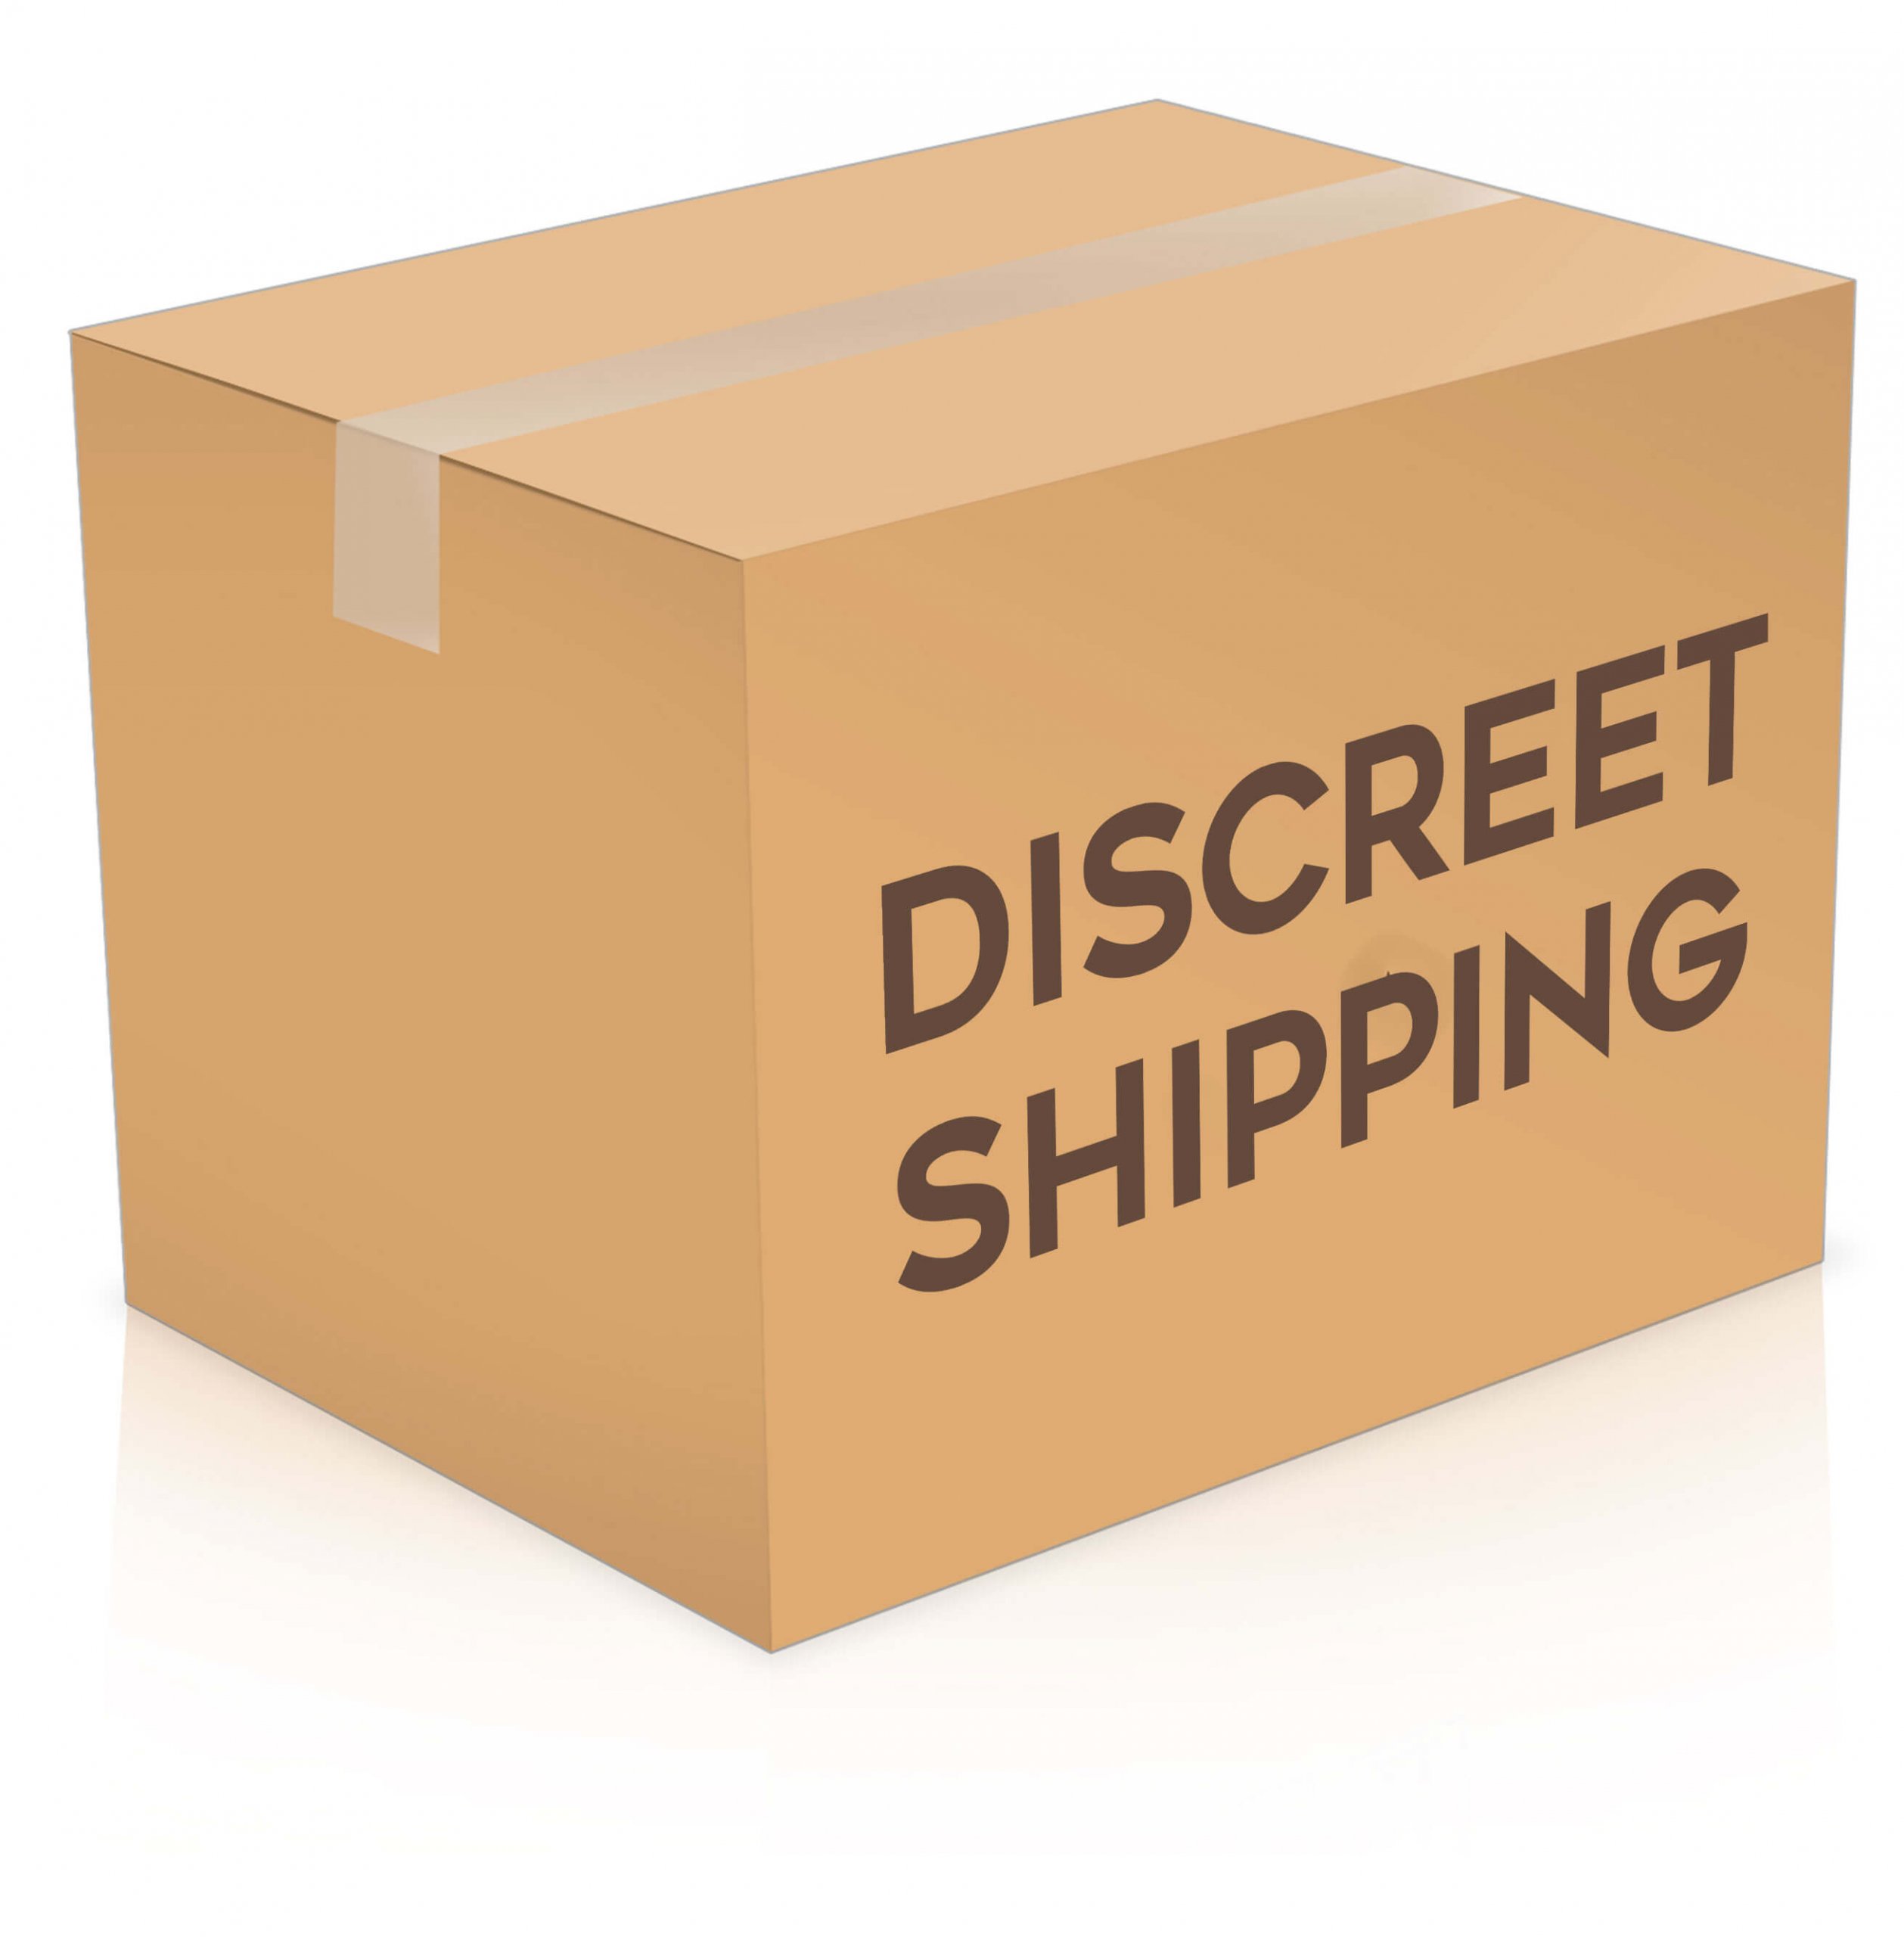 Discreet shipping box for anonymous shipping when buying secret steroids in Canada